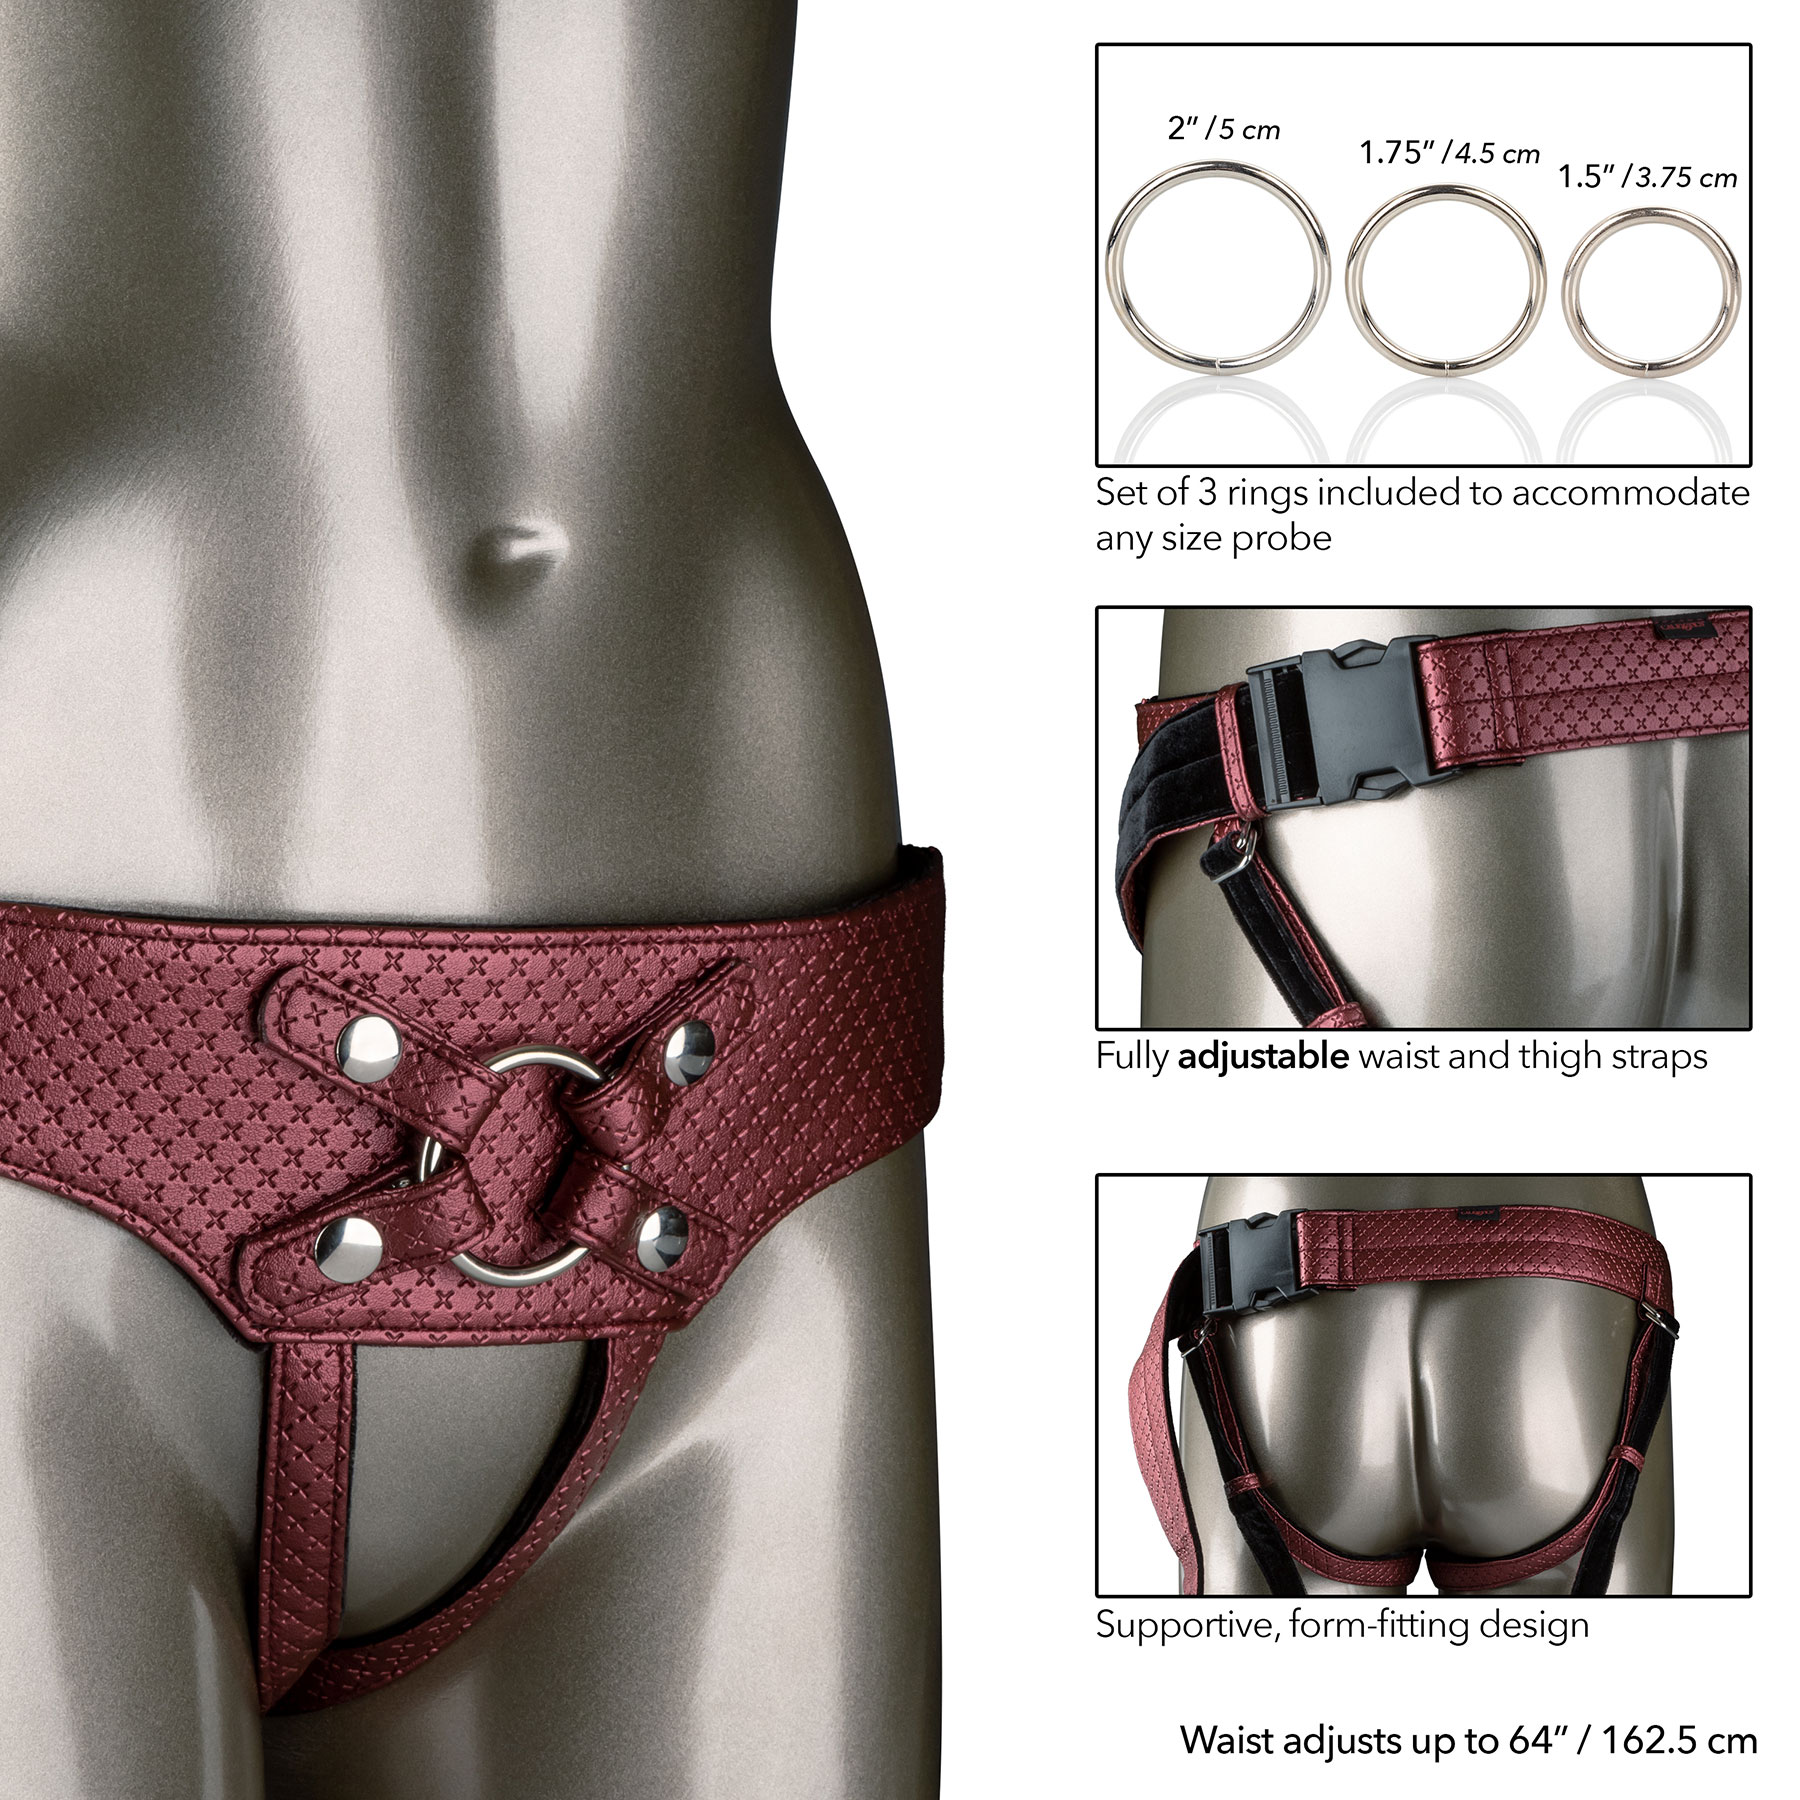 Her Royal Harness The Regal Empress O-Ring Harness - Details